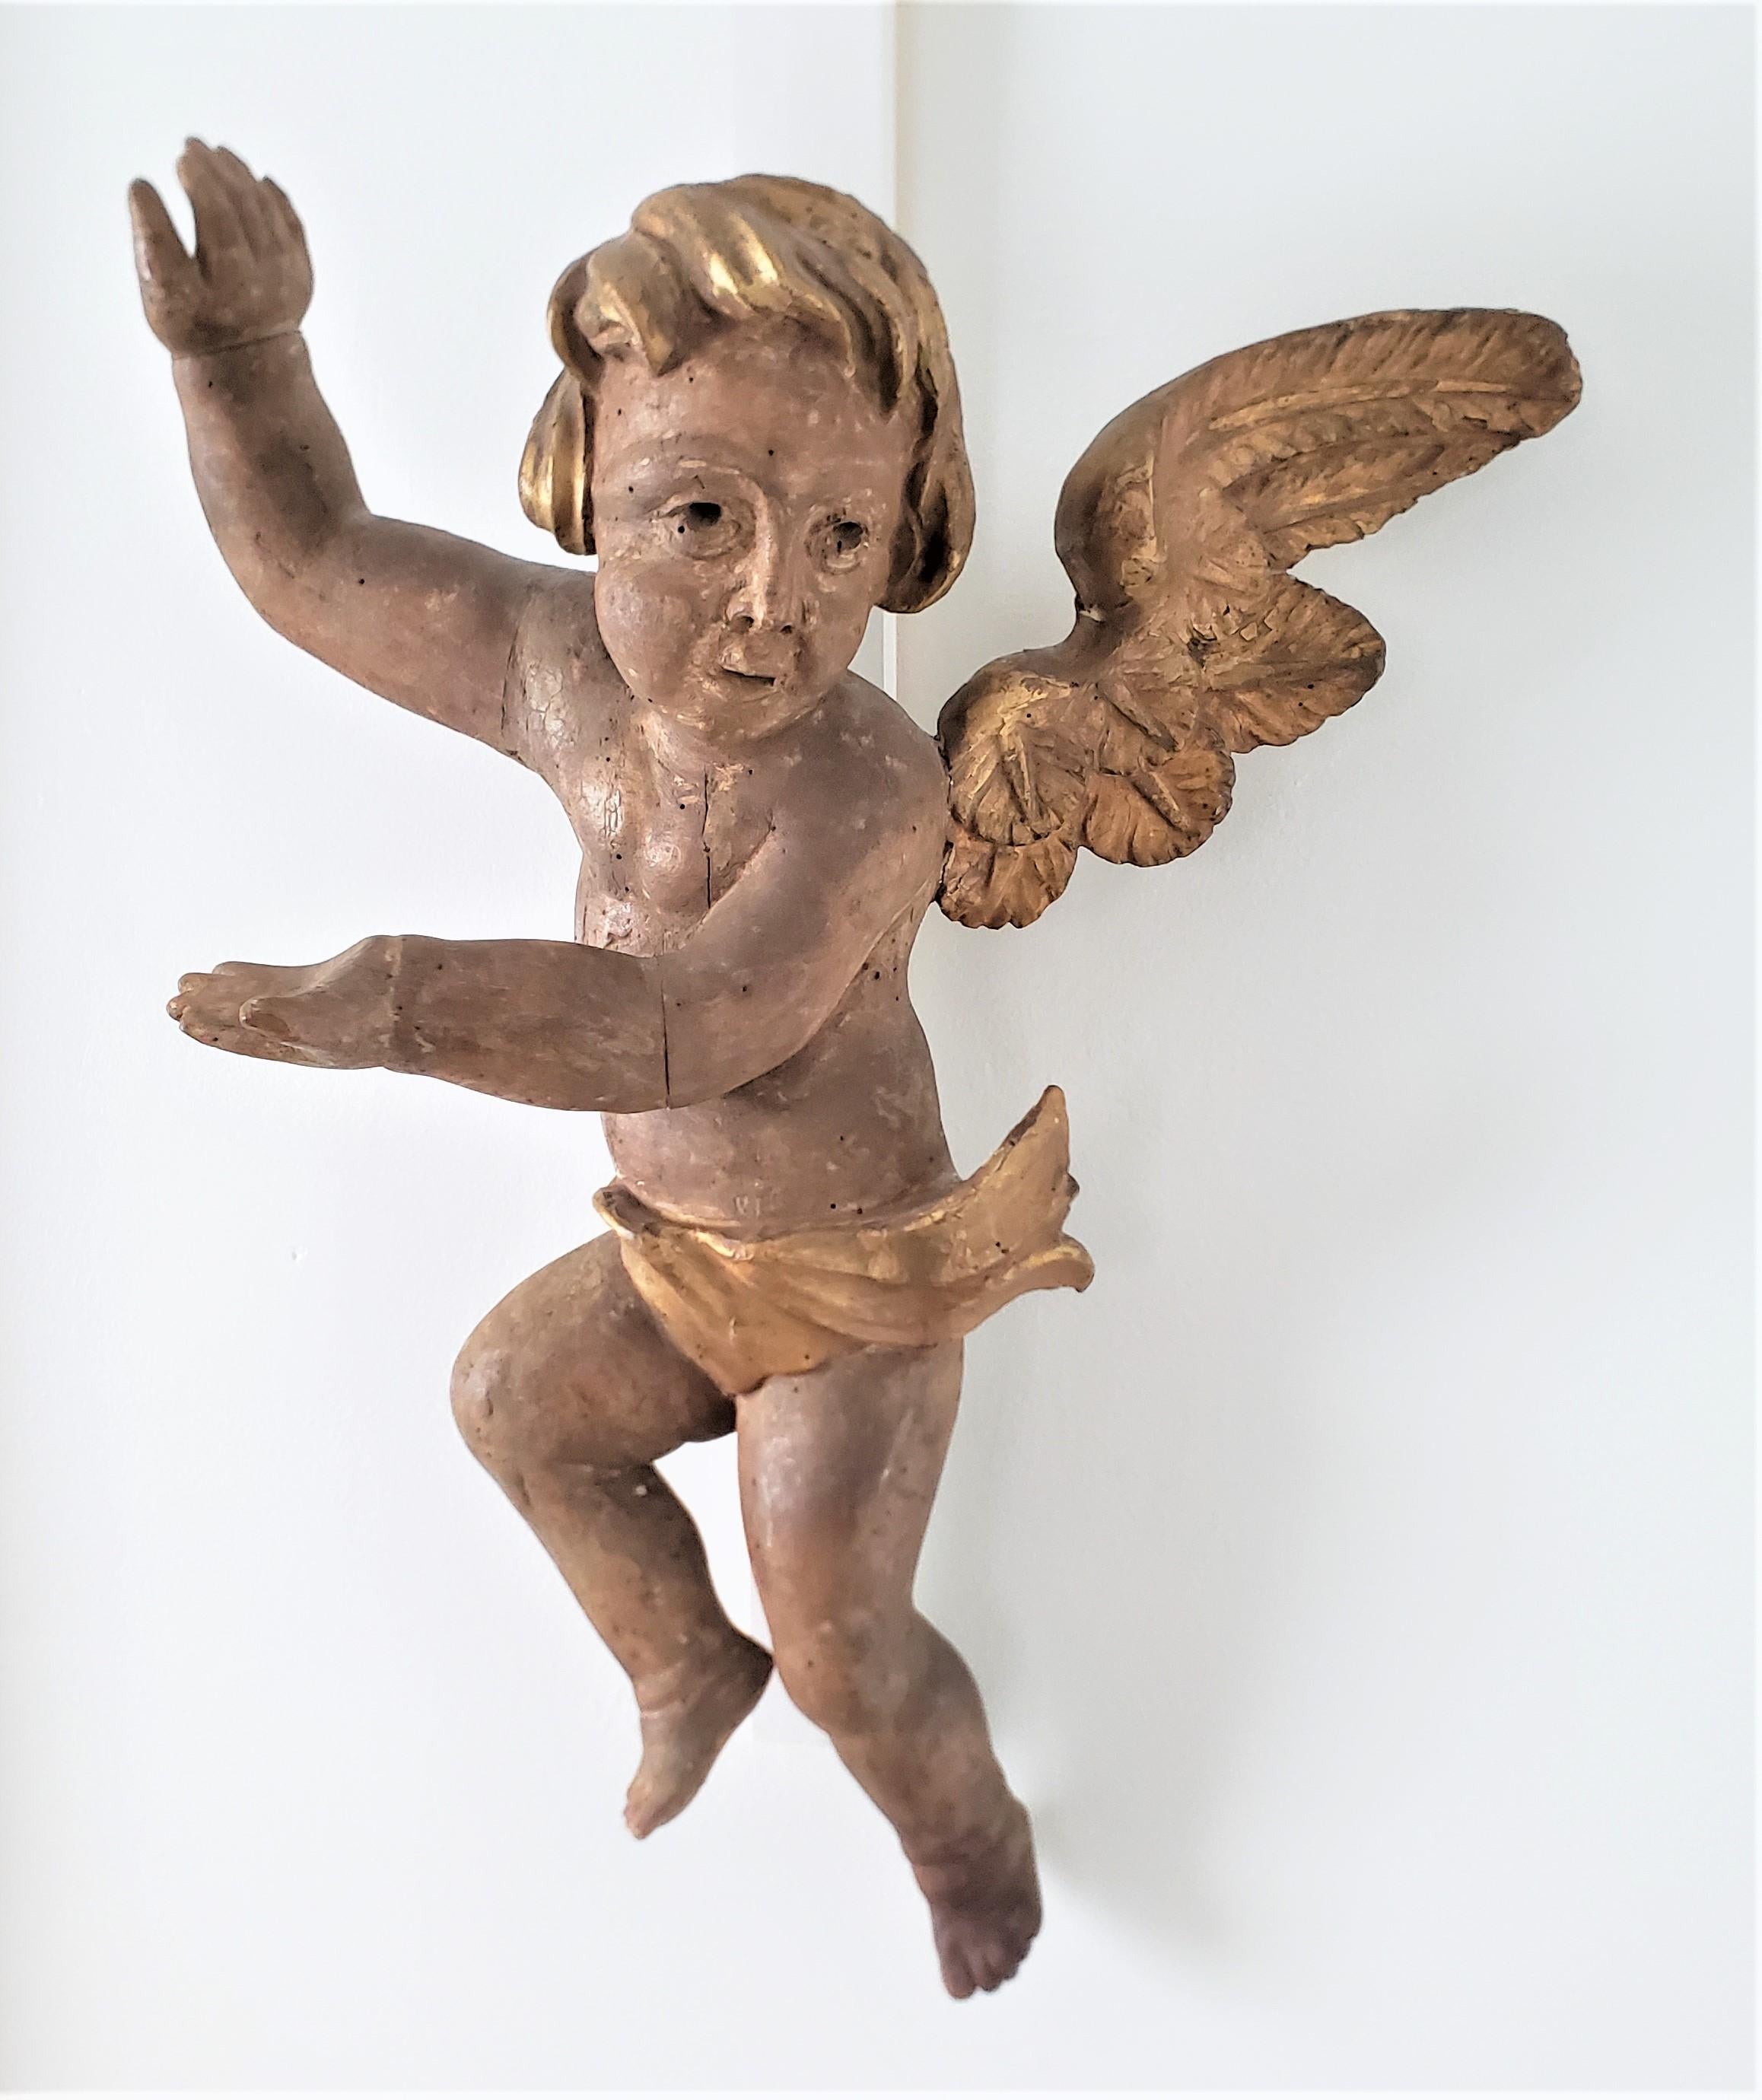 This large hand-carved wooden cherub is unsigned, but presumed to have originated from Germany and dating to approximately 1750 and done in the period Rococo style. The sculpture is composed of a softwood which has been hand-carved and joined in